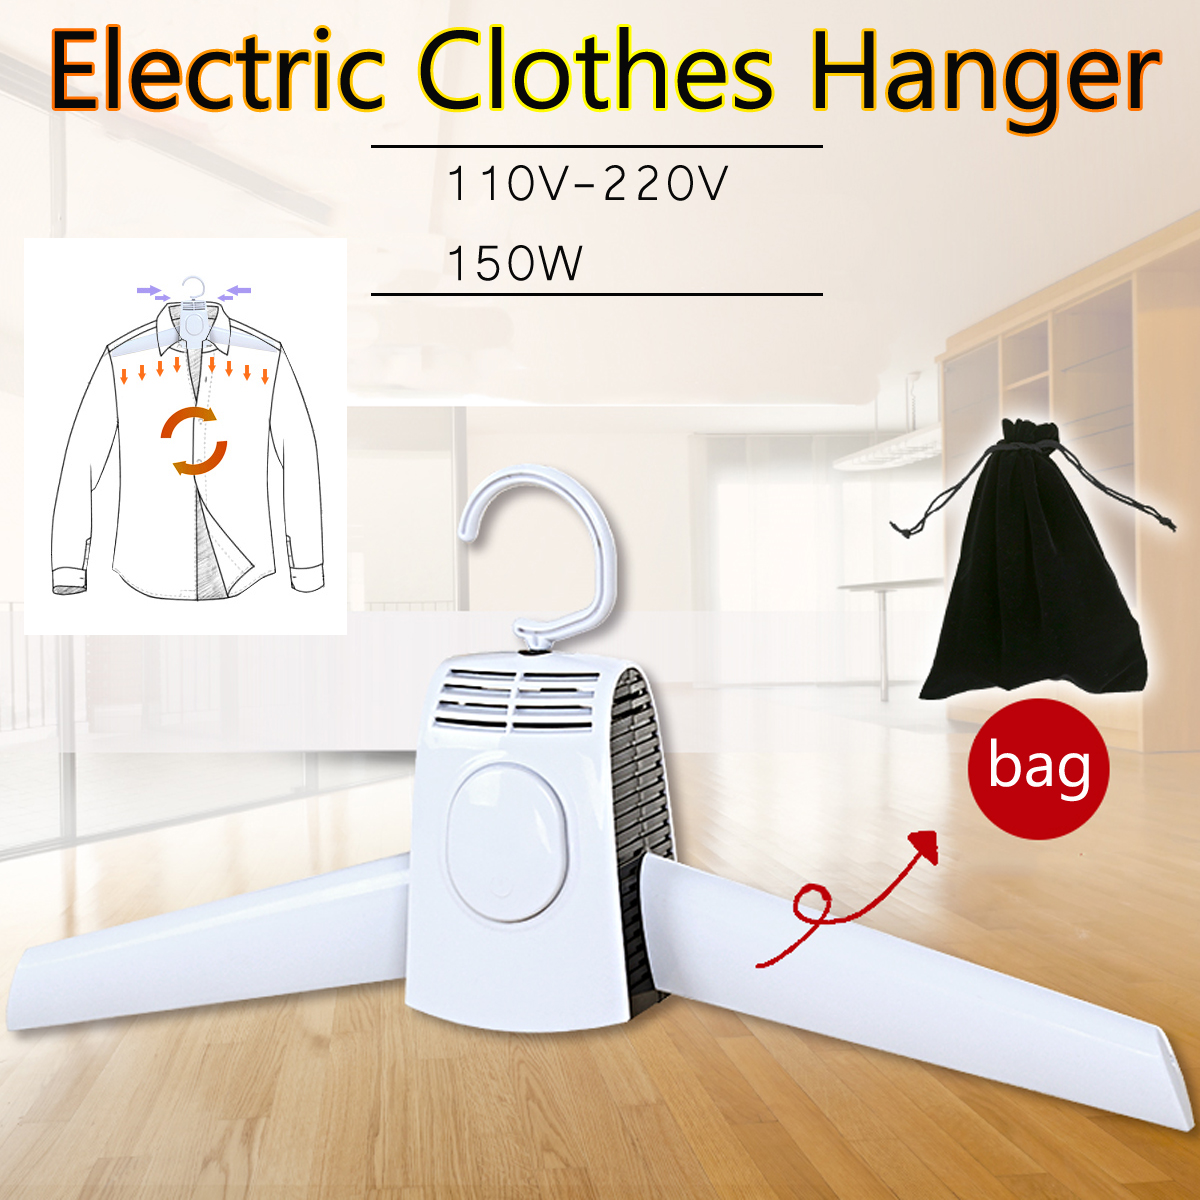 220V Foldable Clothes Hangers Electric Laundry Clothes Dryer Rack Smart Shoes Coat Hanger For Travel Trousers Perchas